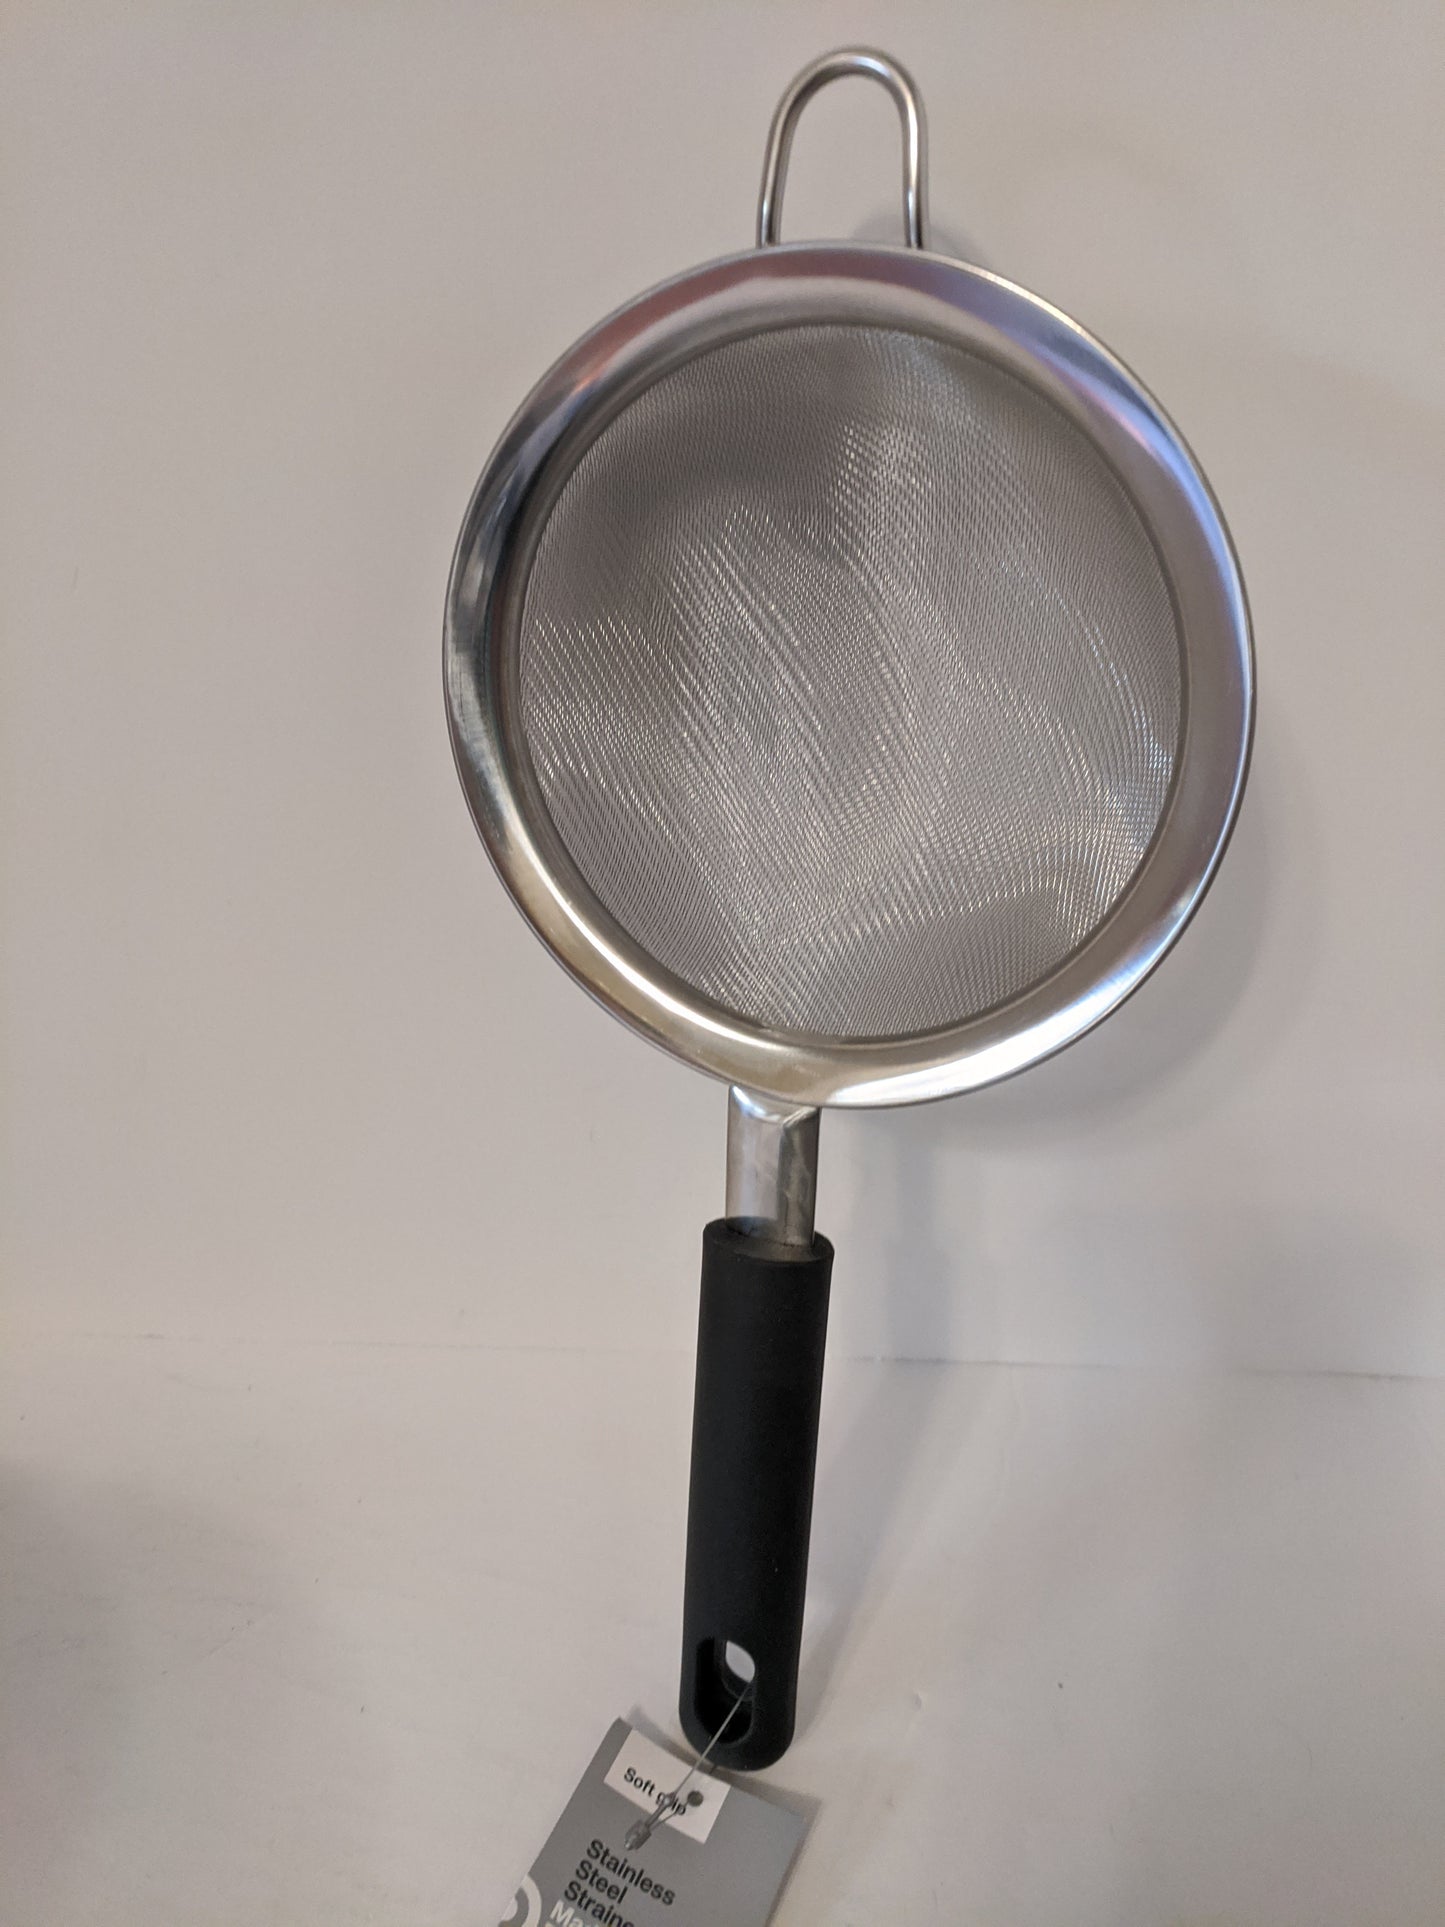 New Stainless Steel Strainer 5 inch